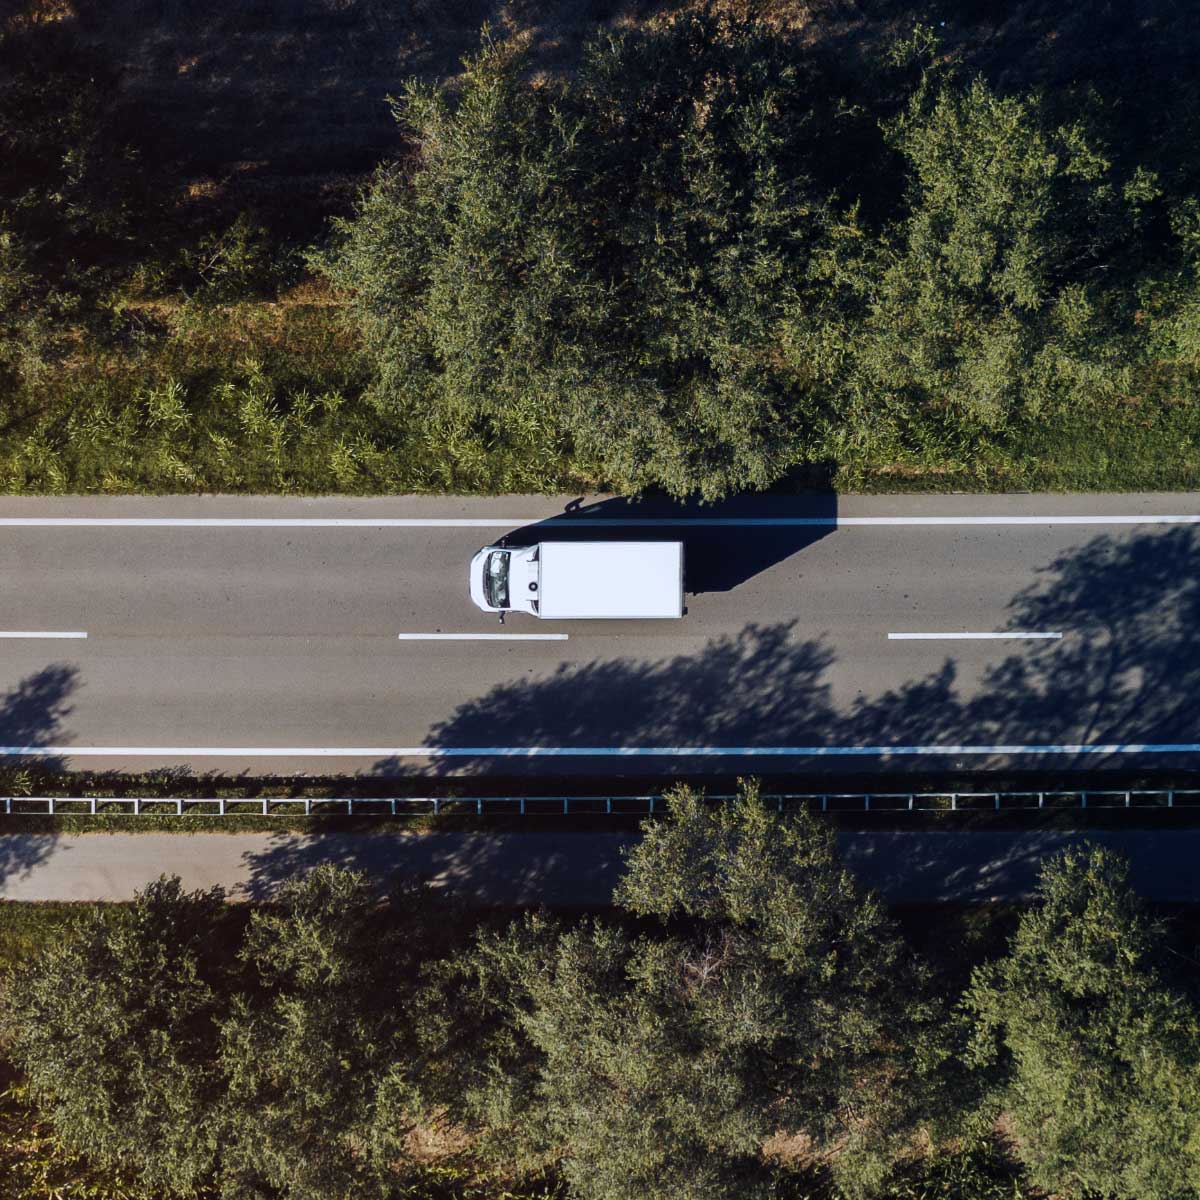 Aerial view of a sprinter van on a county road